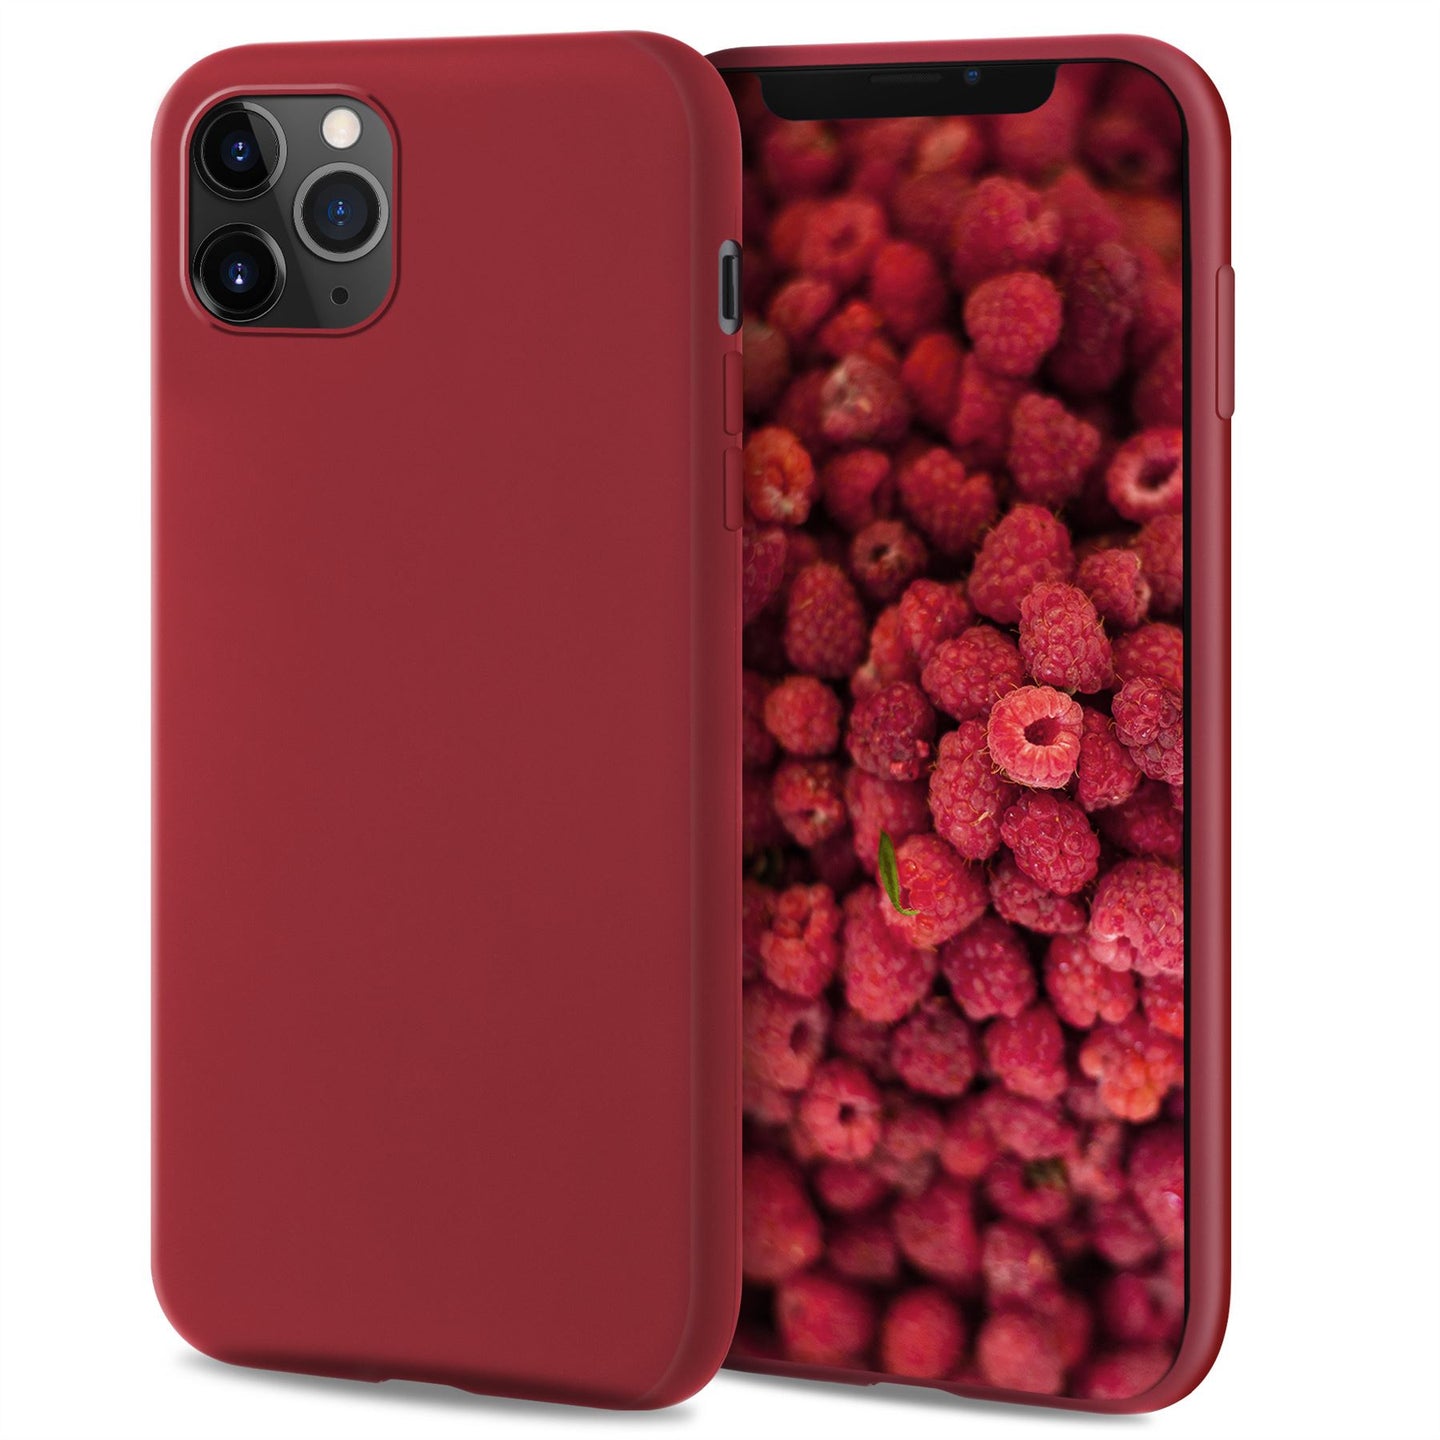 Moozy Lifestyle. Designed for iPhone 12 Pro Max Case, Vintage Pink - Liquid Silicone Cover with Matte Finish and Soft Microfiber Lining